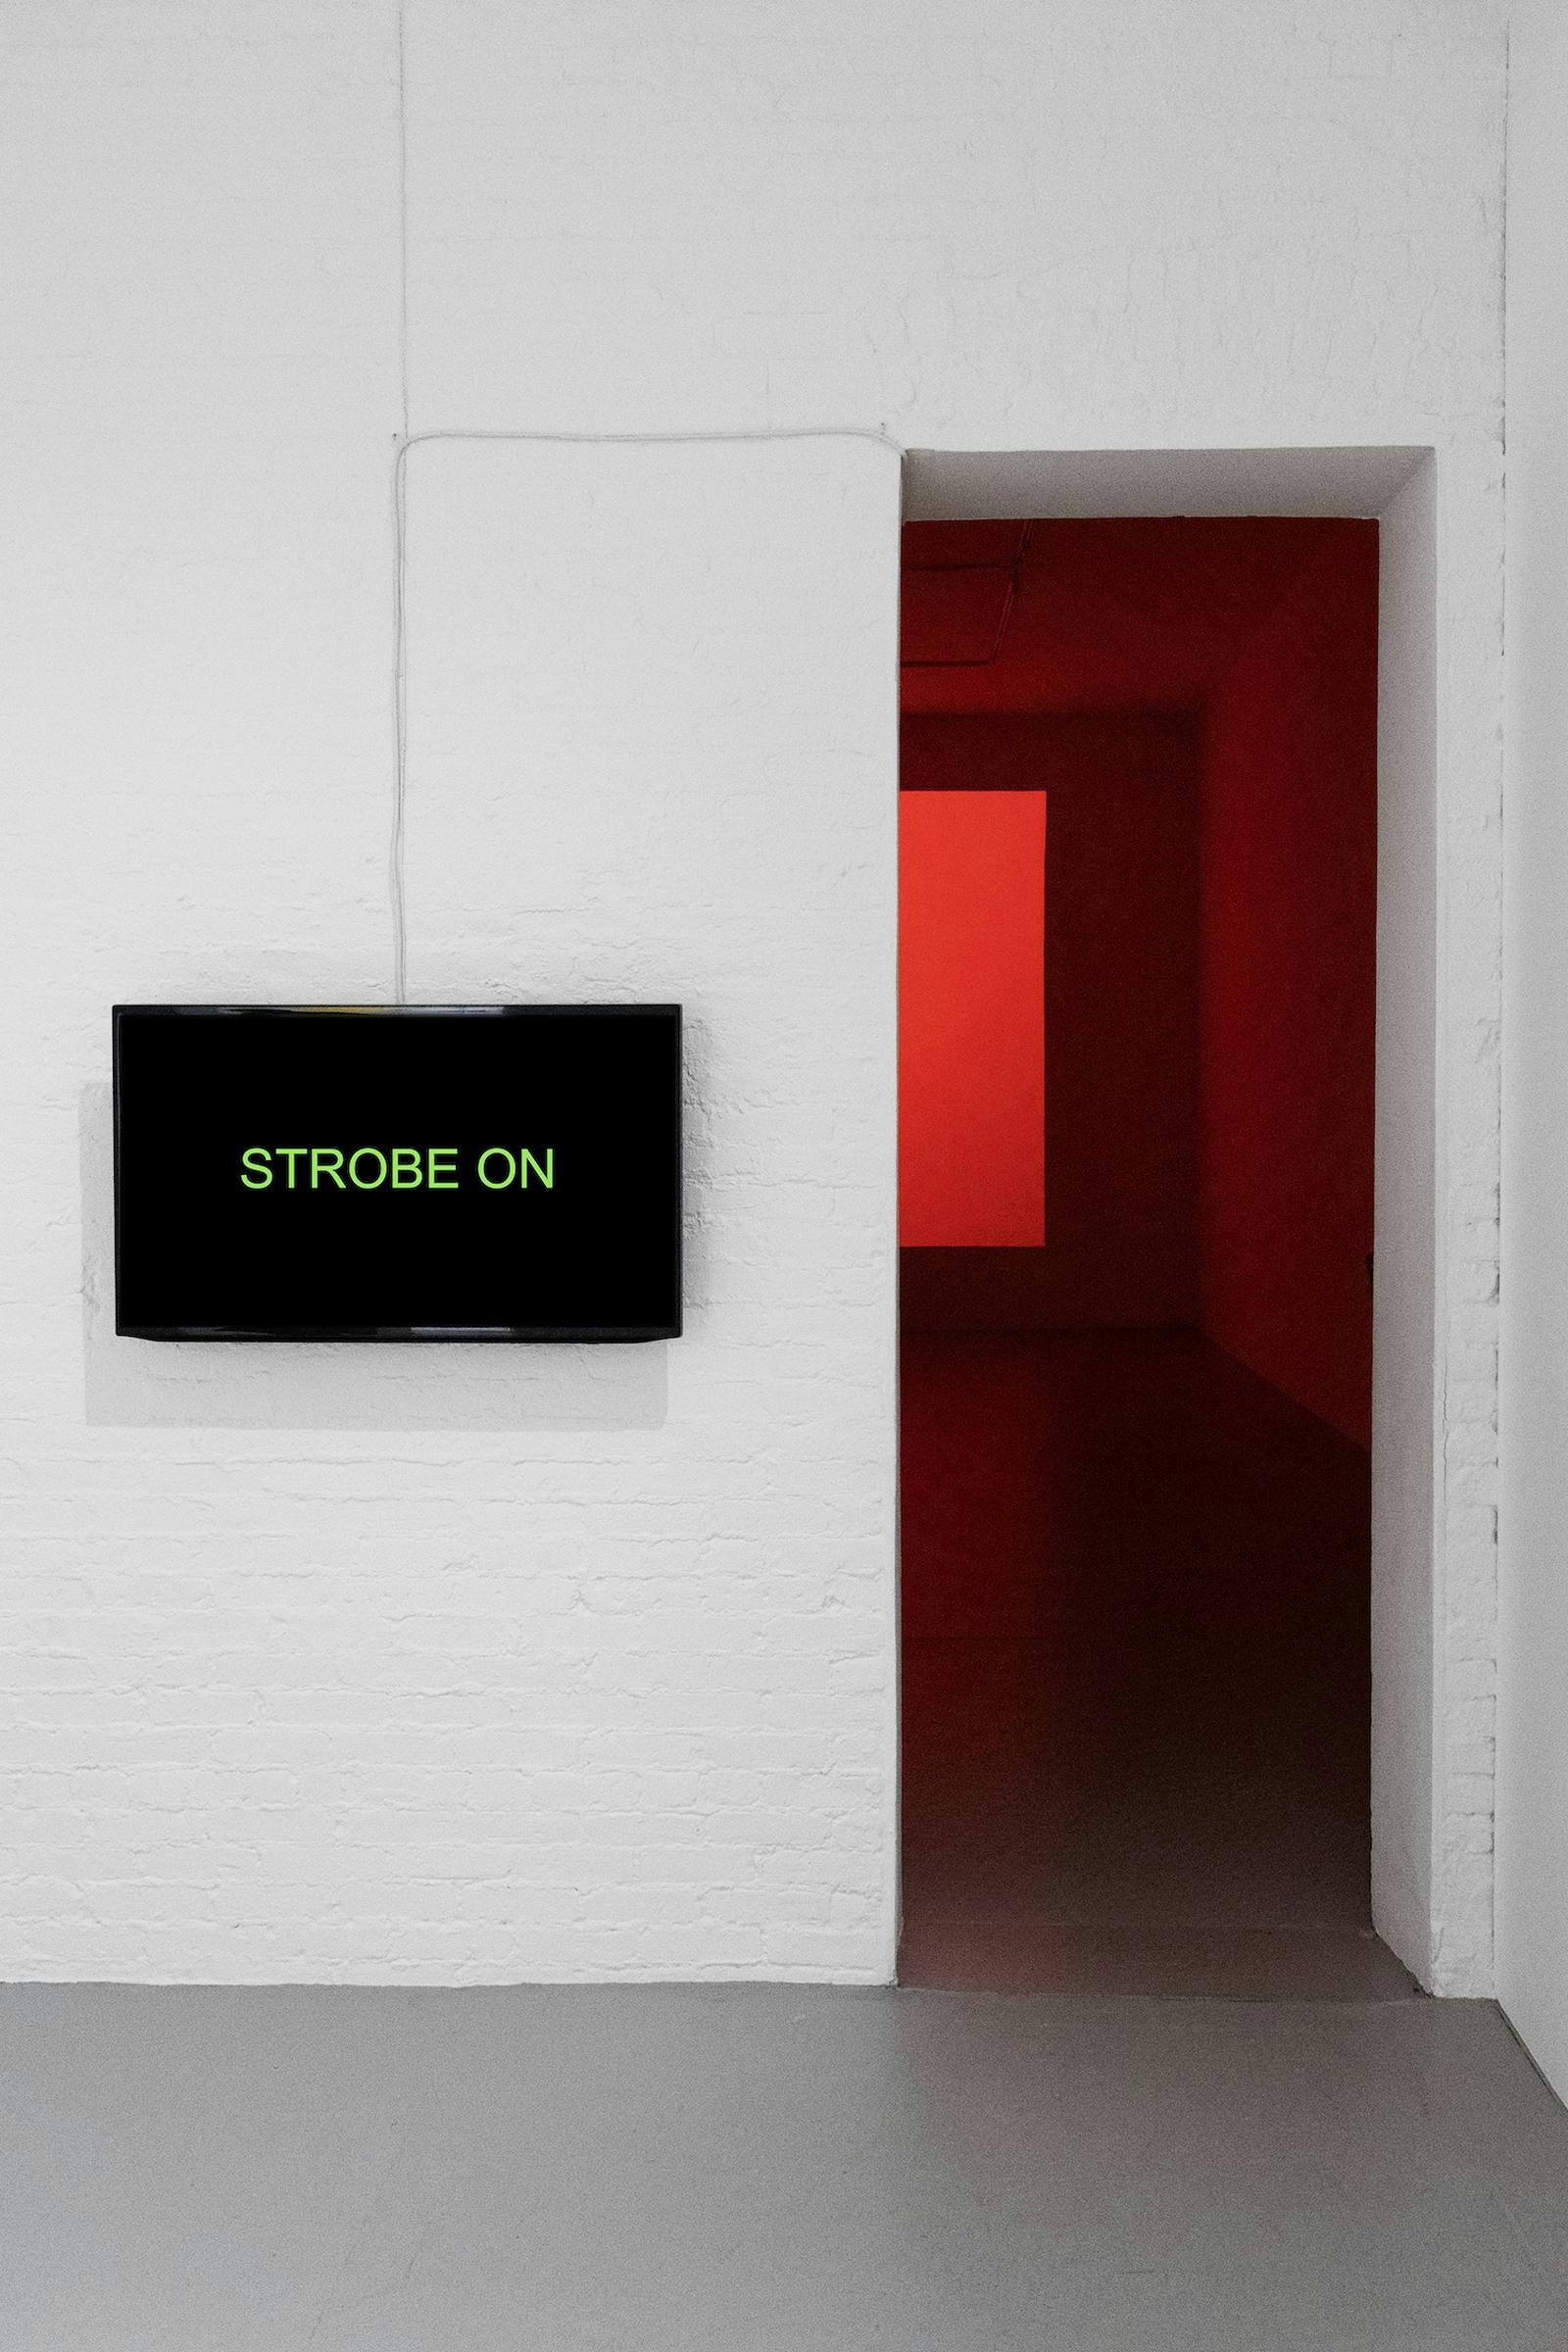 TV screen with black background and 'STROBE ON' in green letters, mounted on a white wall. To the right, there is an archway into a red lit room.